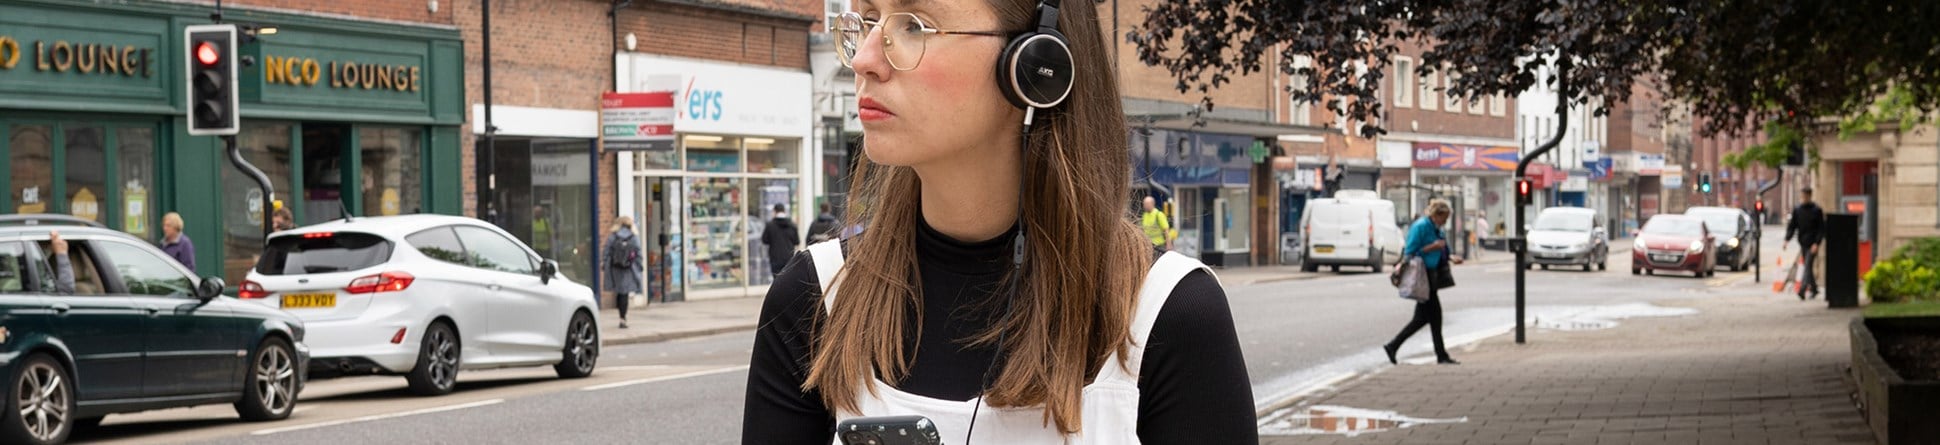 Woman walking down a high street listening to something on headphones.